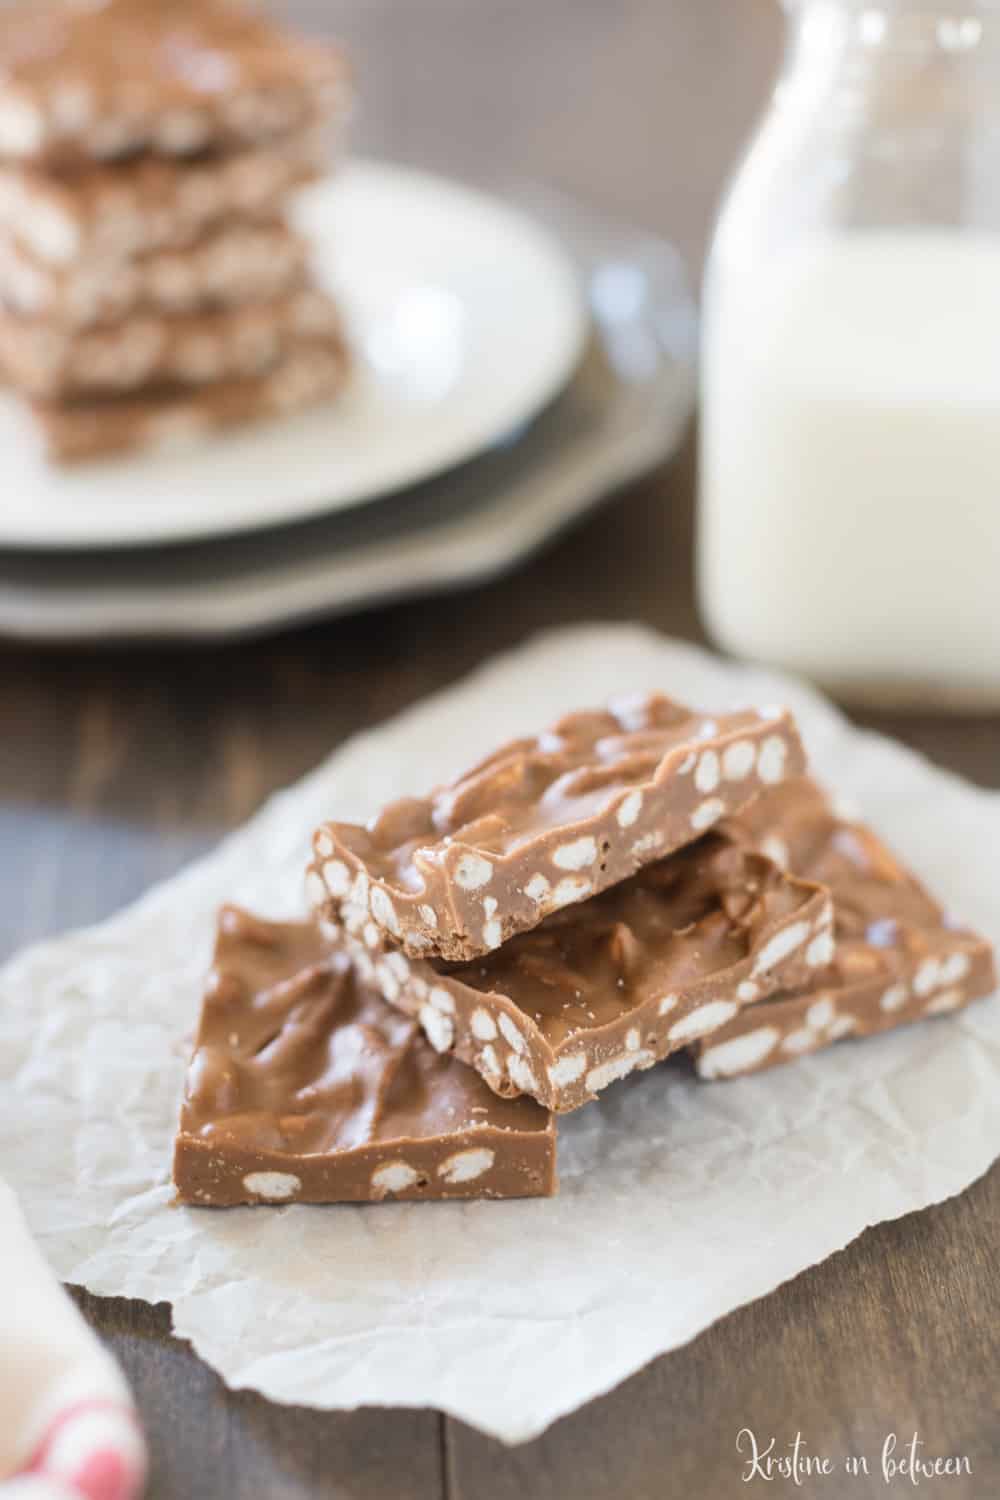 Simple three ingredient peanut butter chocolate crunch bars! These bars are low in sugar and high in protein.